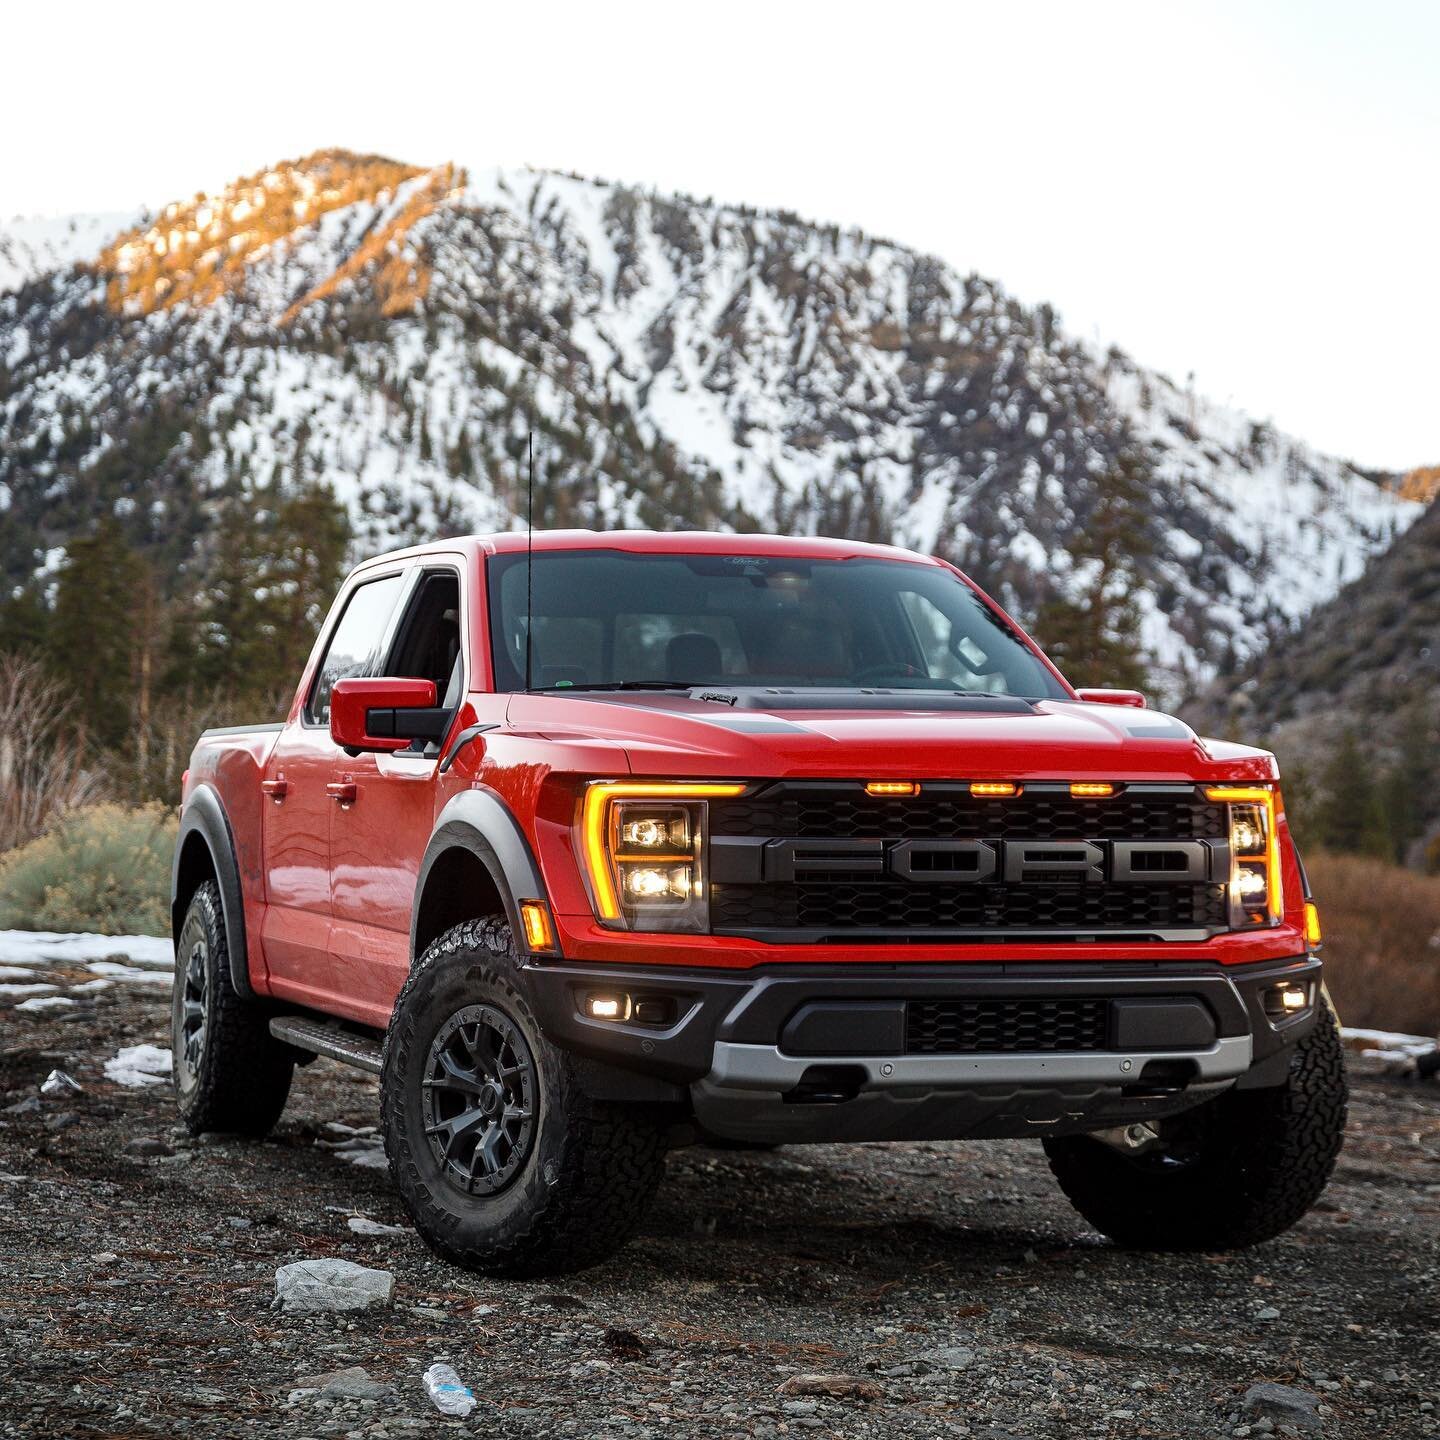 The Ford Raptor is the most impressive truck you can buy in 2022. It has spent the last decade solidifying its place in history. From a stage win at the Dakar Rally to multiple finishes in the SCORE Baja 1000, throughout the years the Raptor has prov